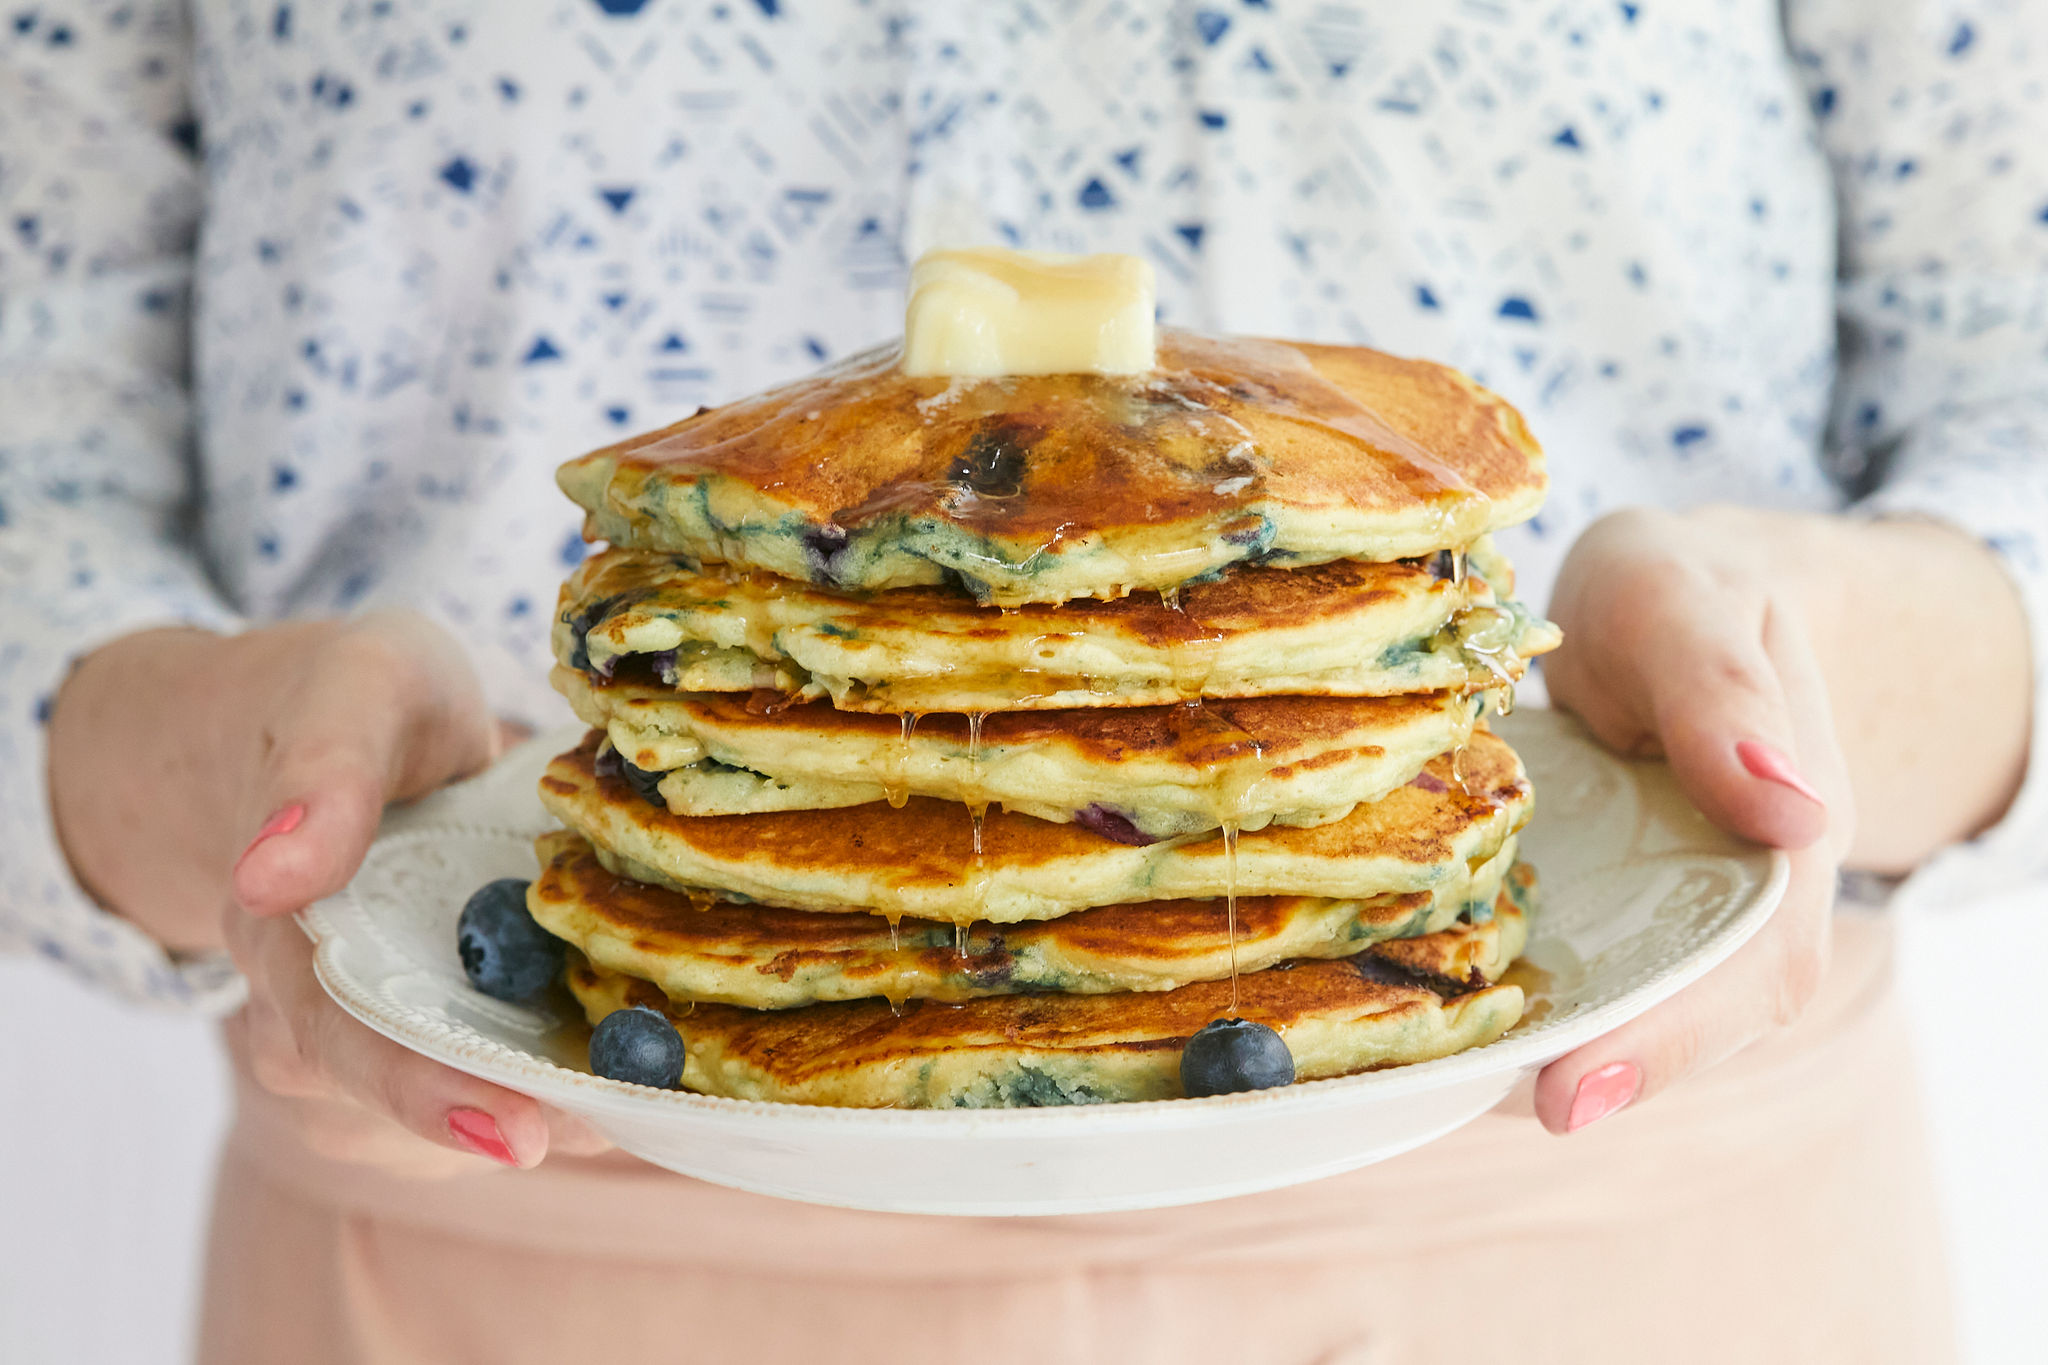 A fresh stack of homemade blueberry pancakes, topped with butter, syrup, and being held on a plate by Gemma Stafford.